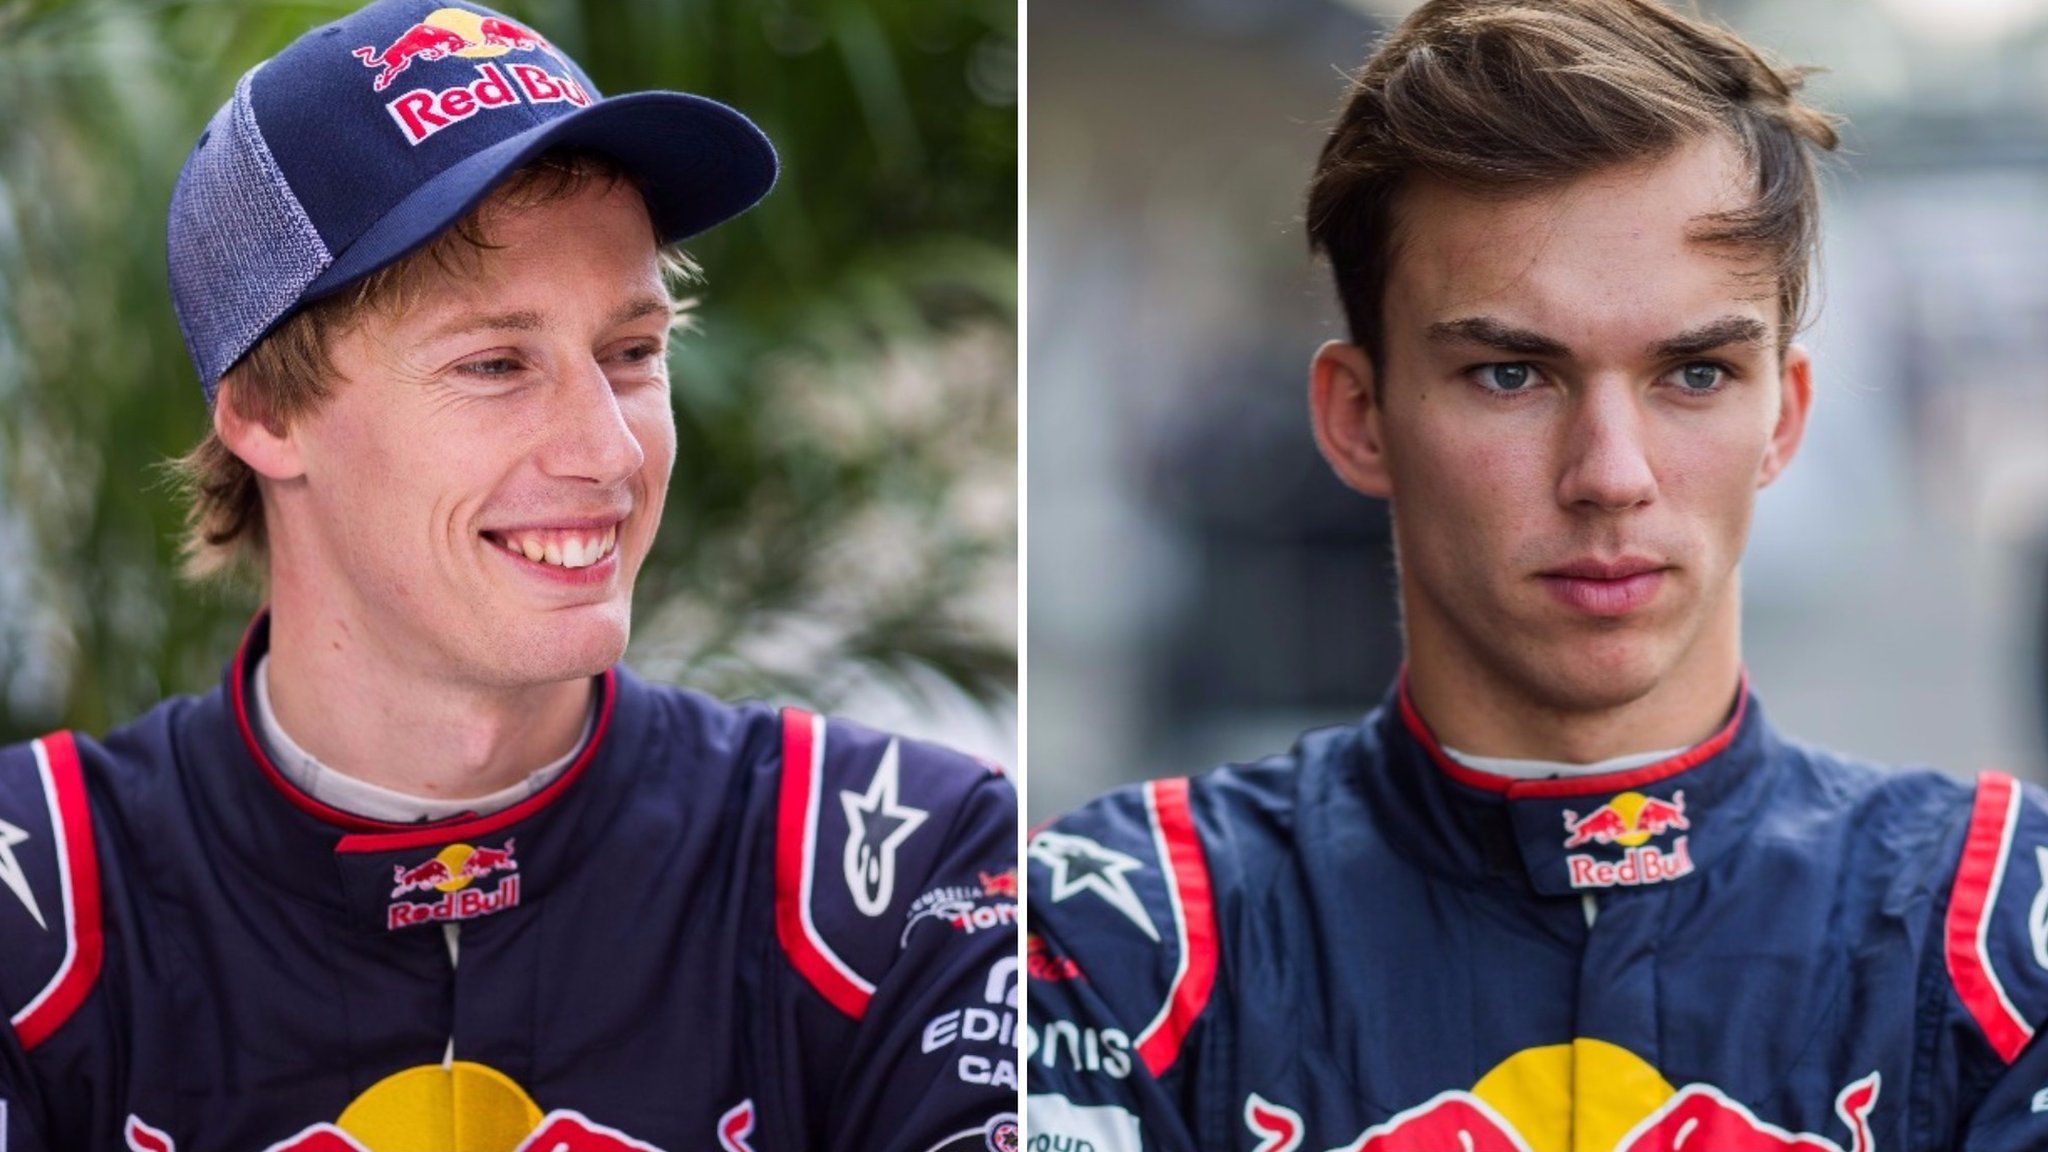 Toro Rosso's Brendon Hartley and Pierre Gasly